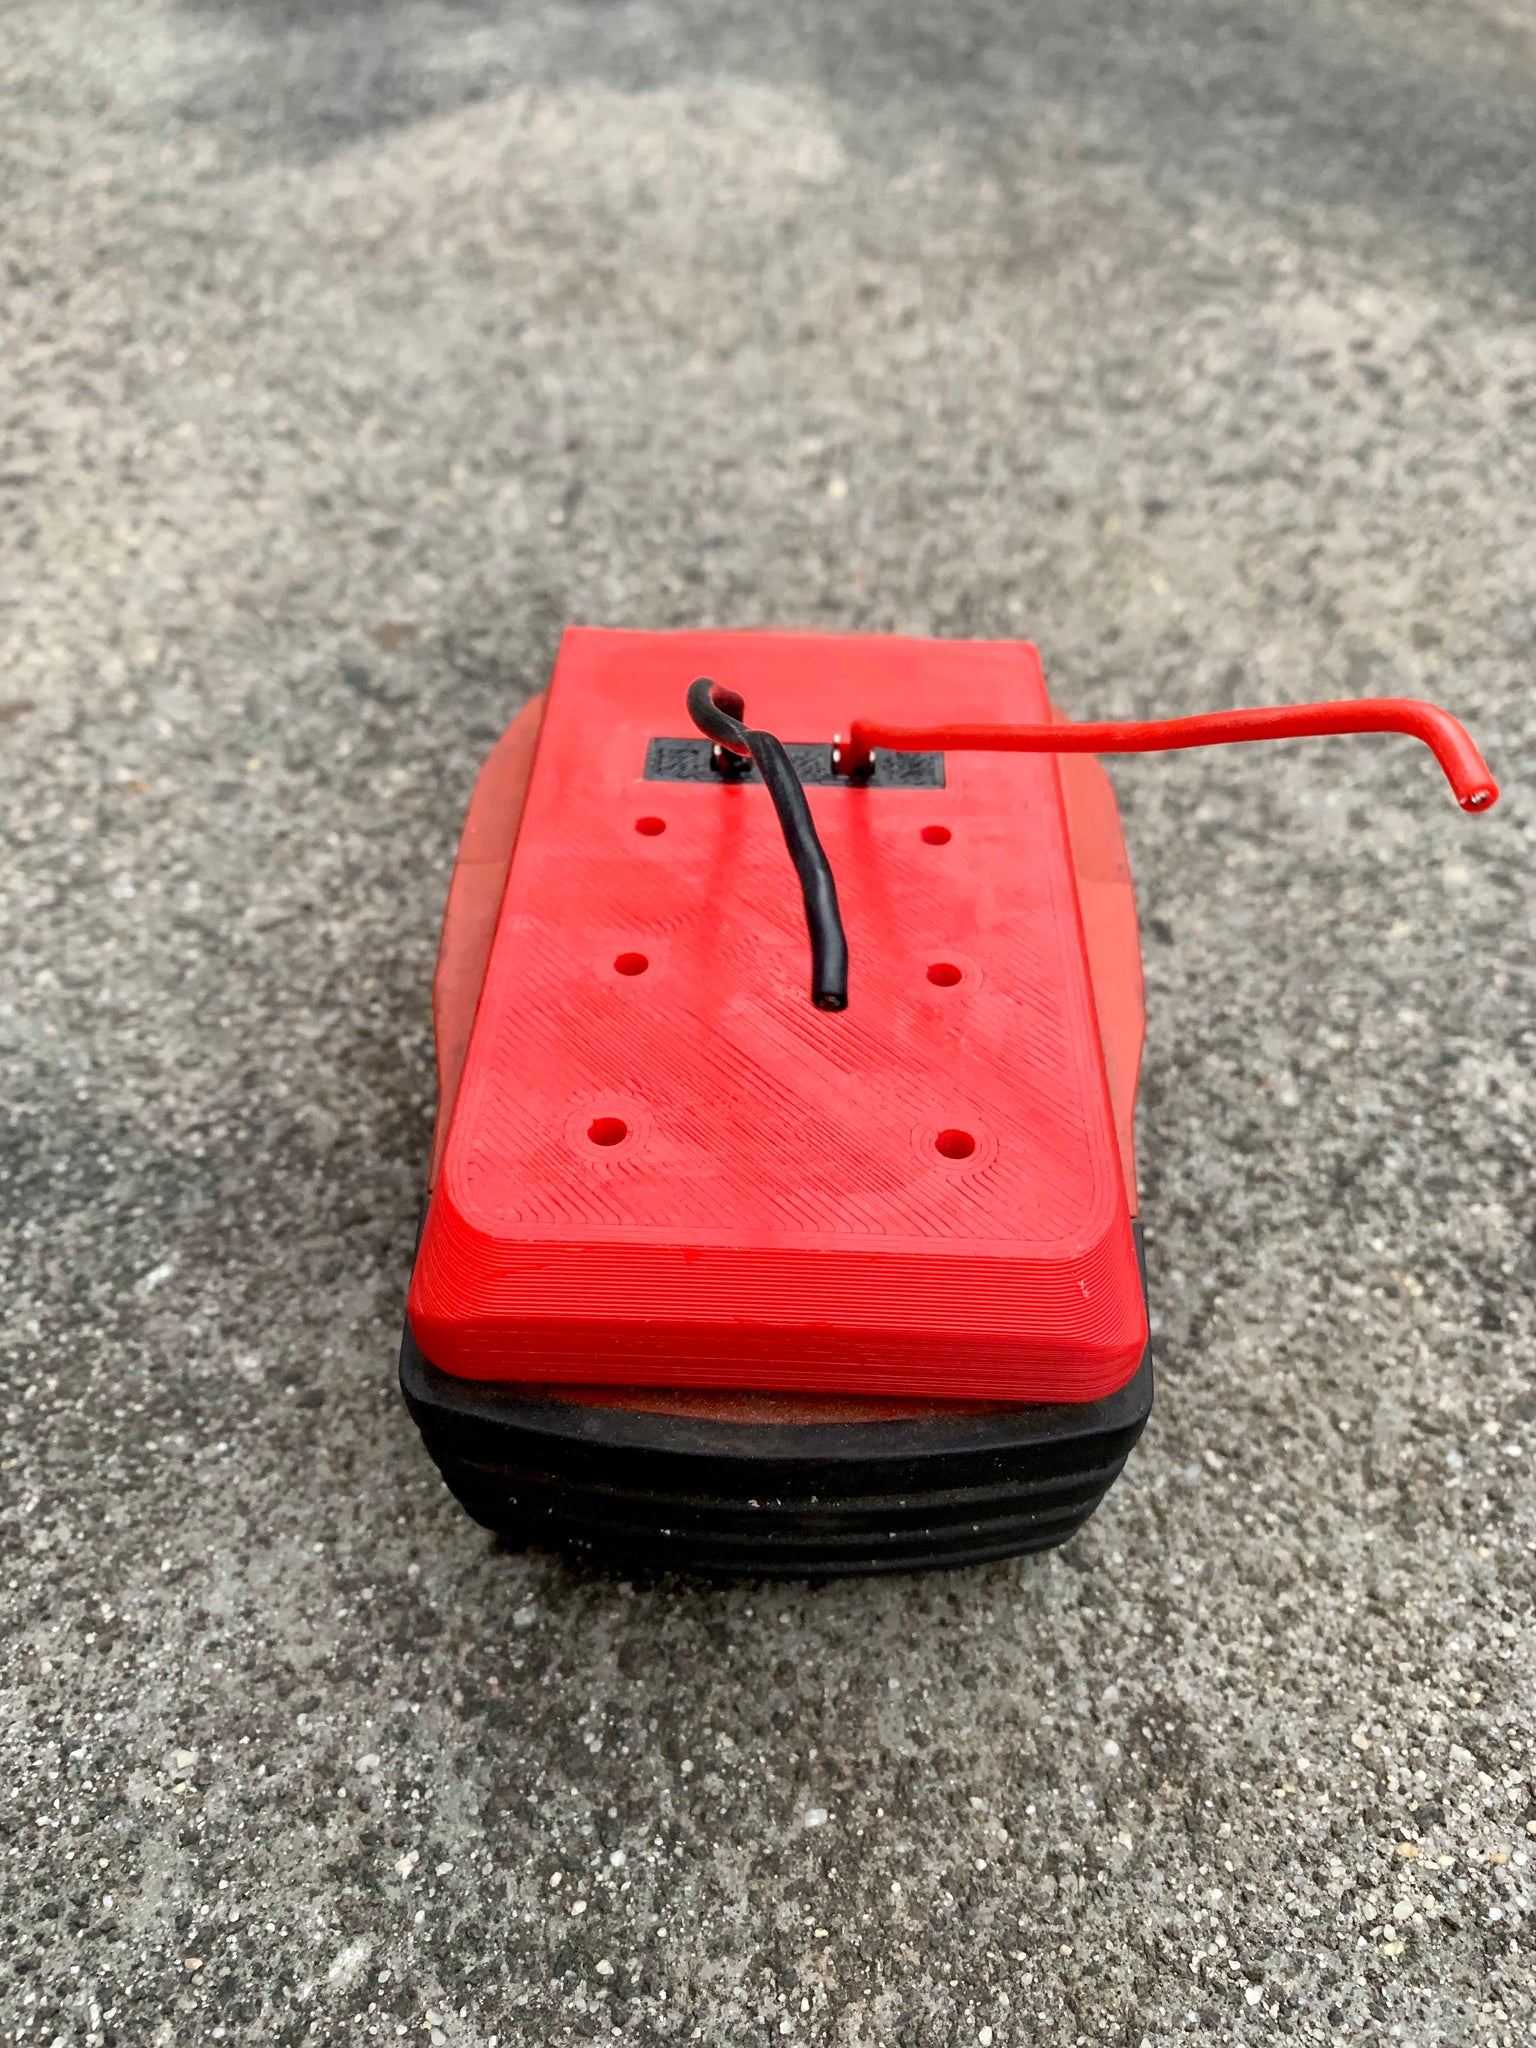 Hilti 22v battery adaptor plate / base for DIY projects